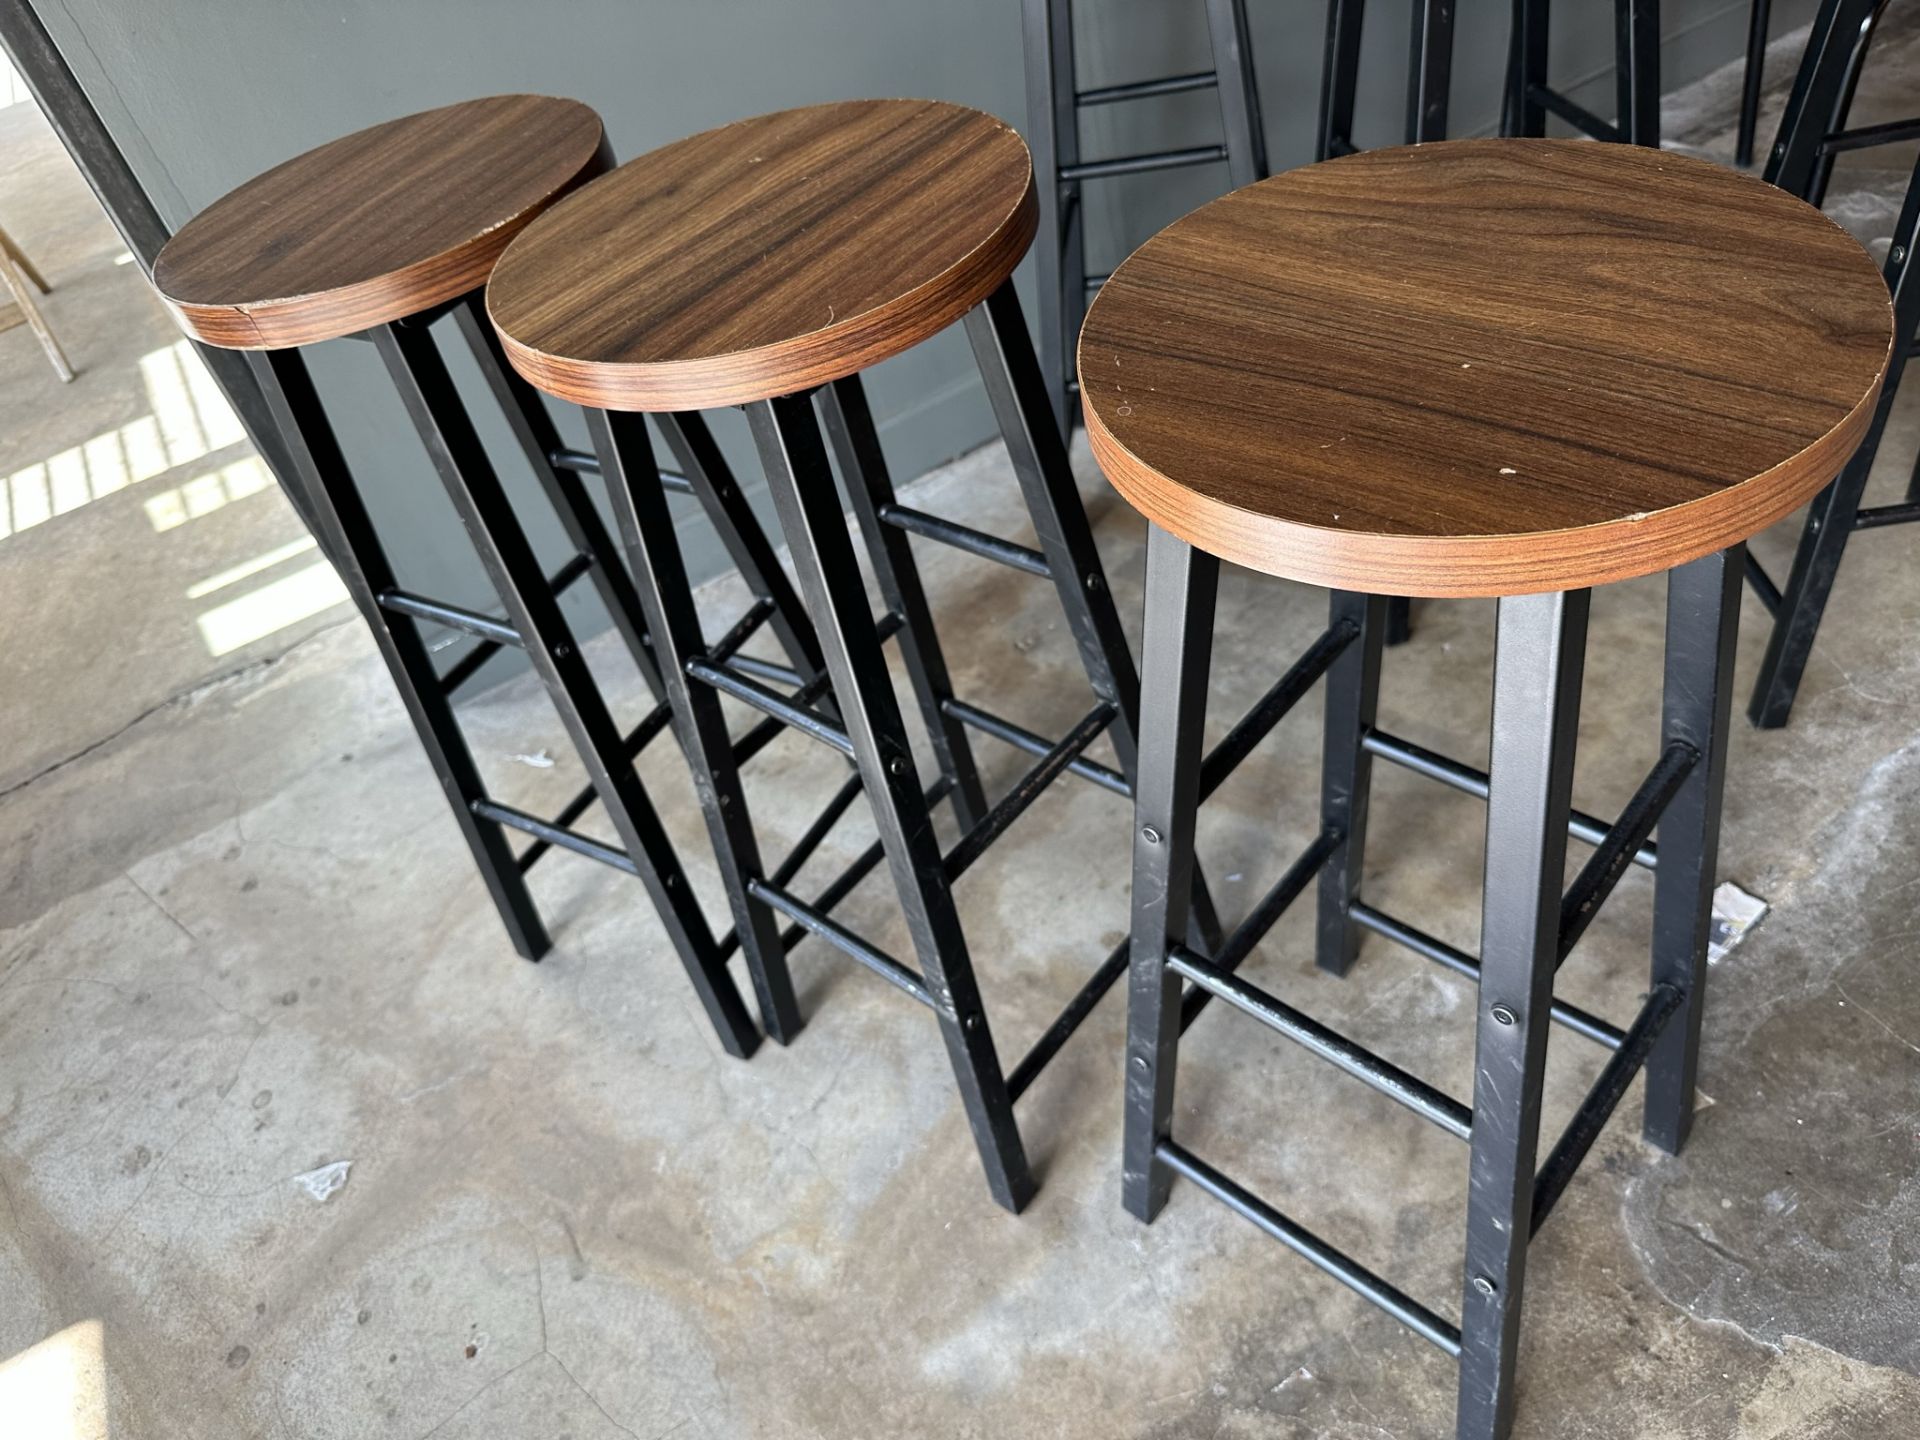 High Wooden Table With Stools With 3 Stools - Image 3 of 3